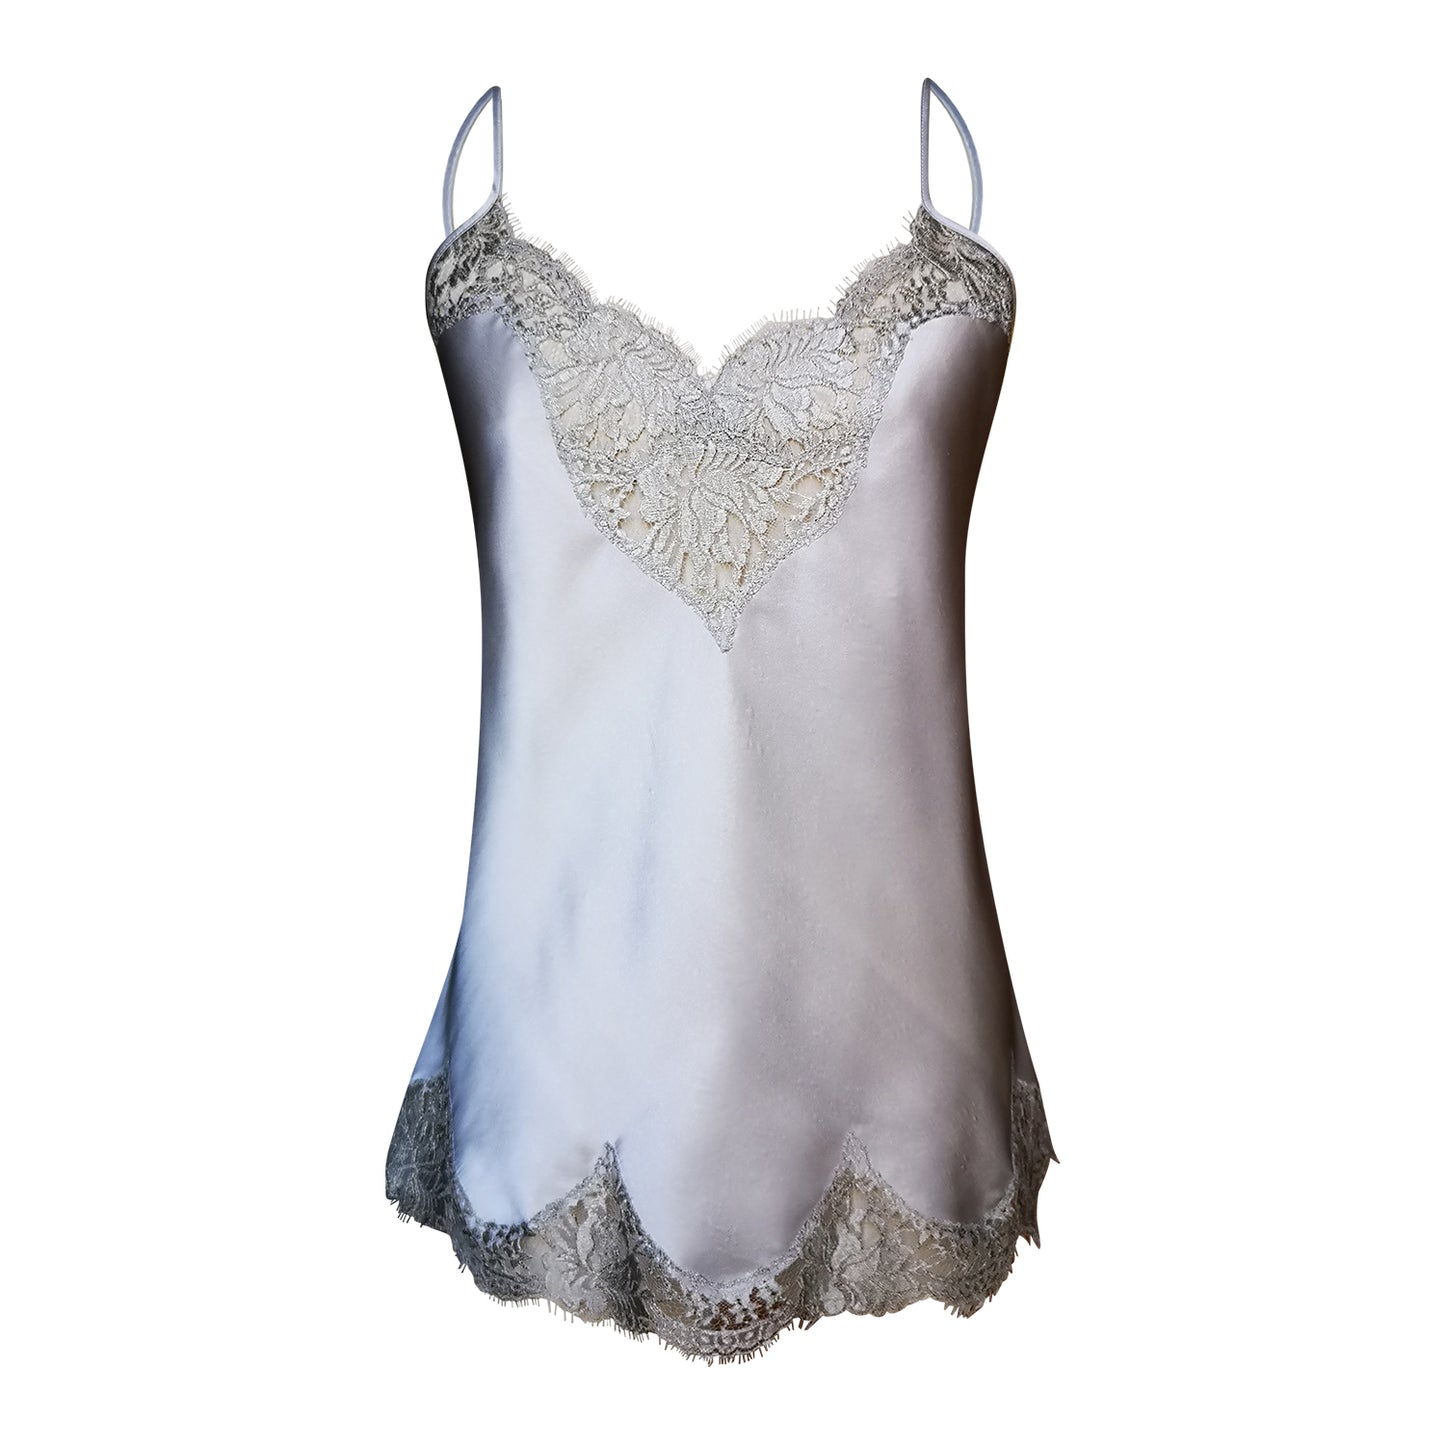 Oyster Silk Camisole with Scalloped French Lace